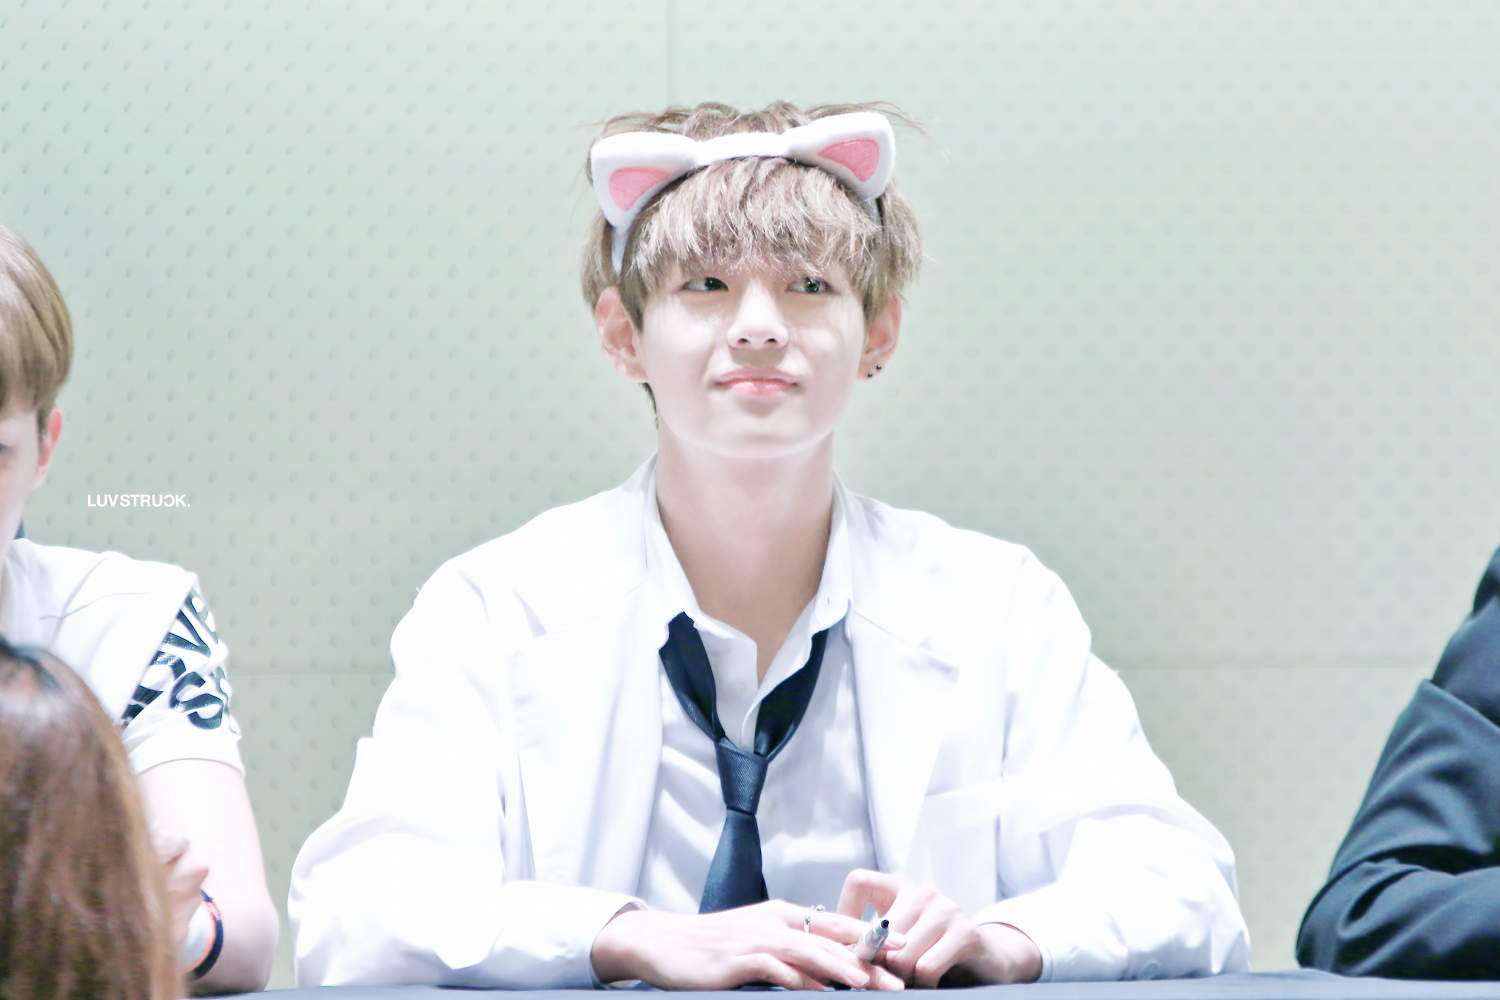 Bts special. 150704 V @ Yeouido Special Fansign in 2019 Taehyung.